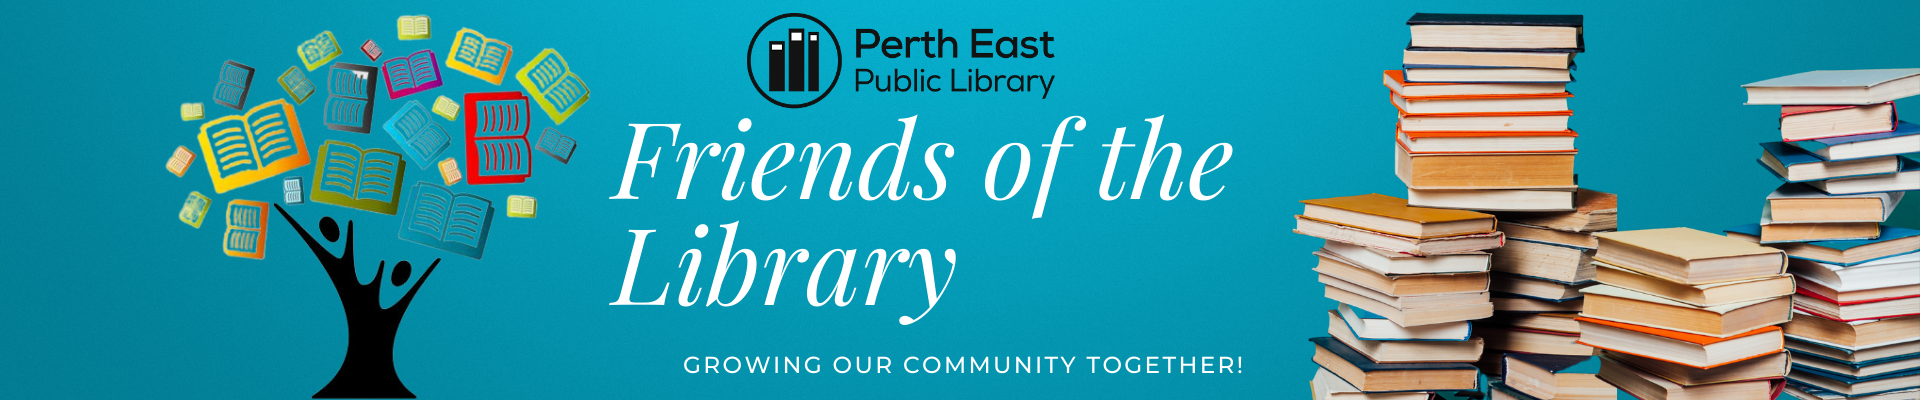 Friends of the library banner 